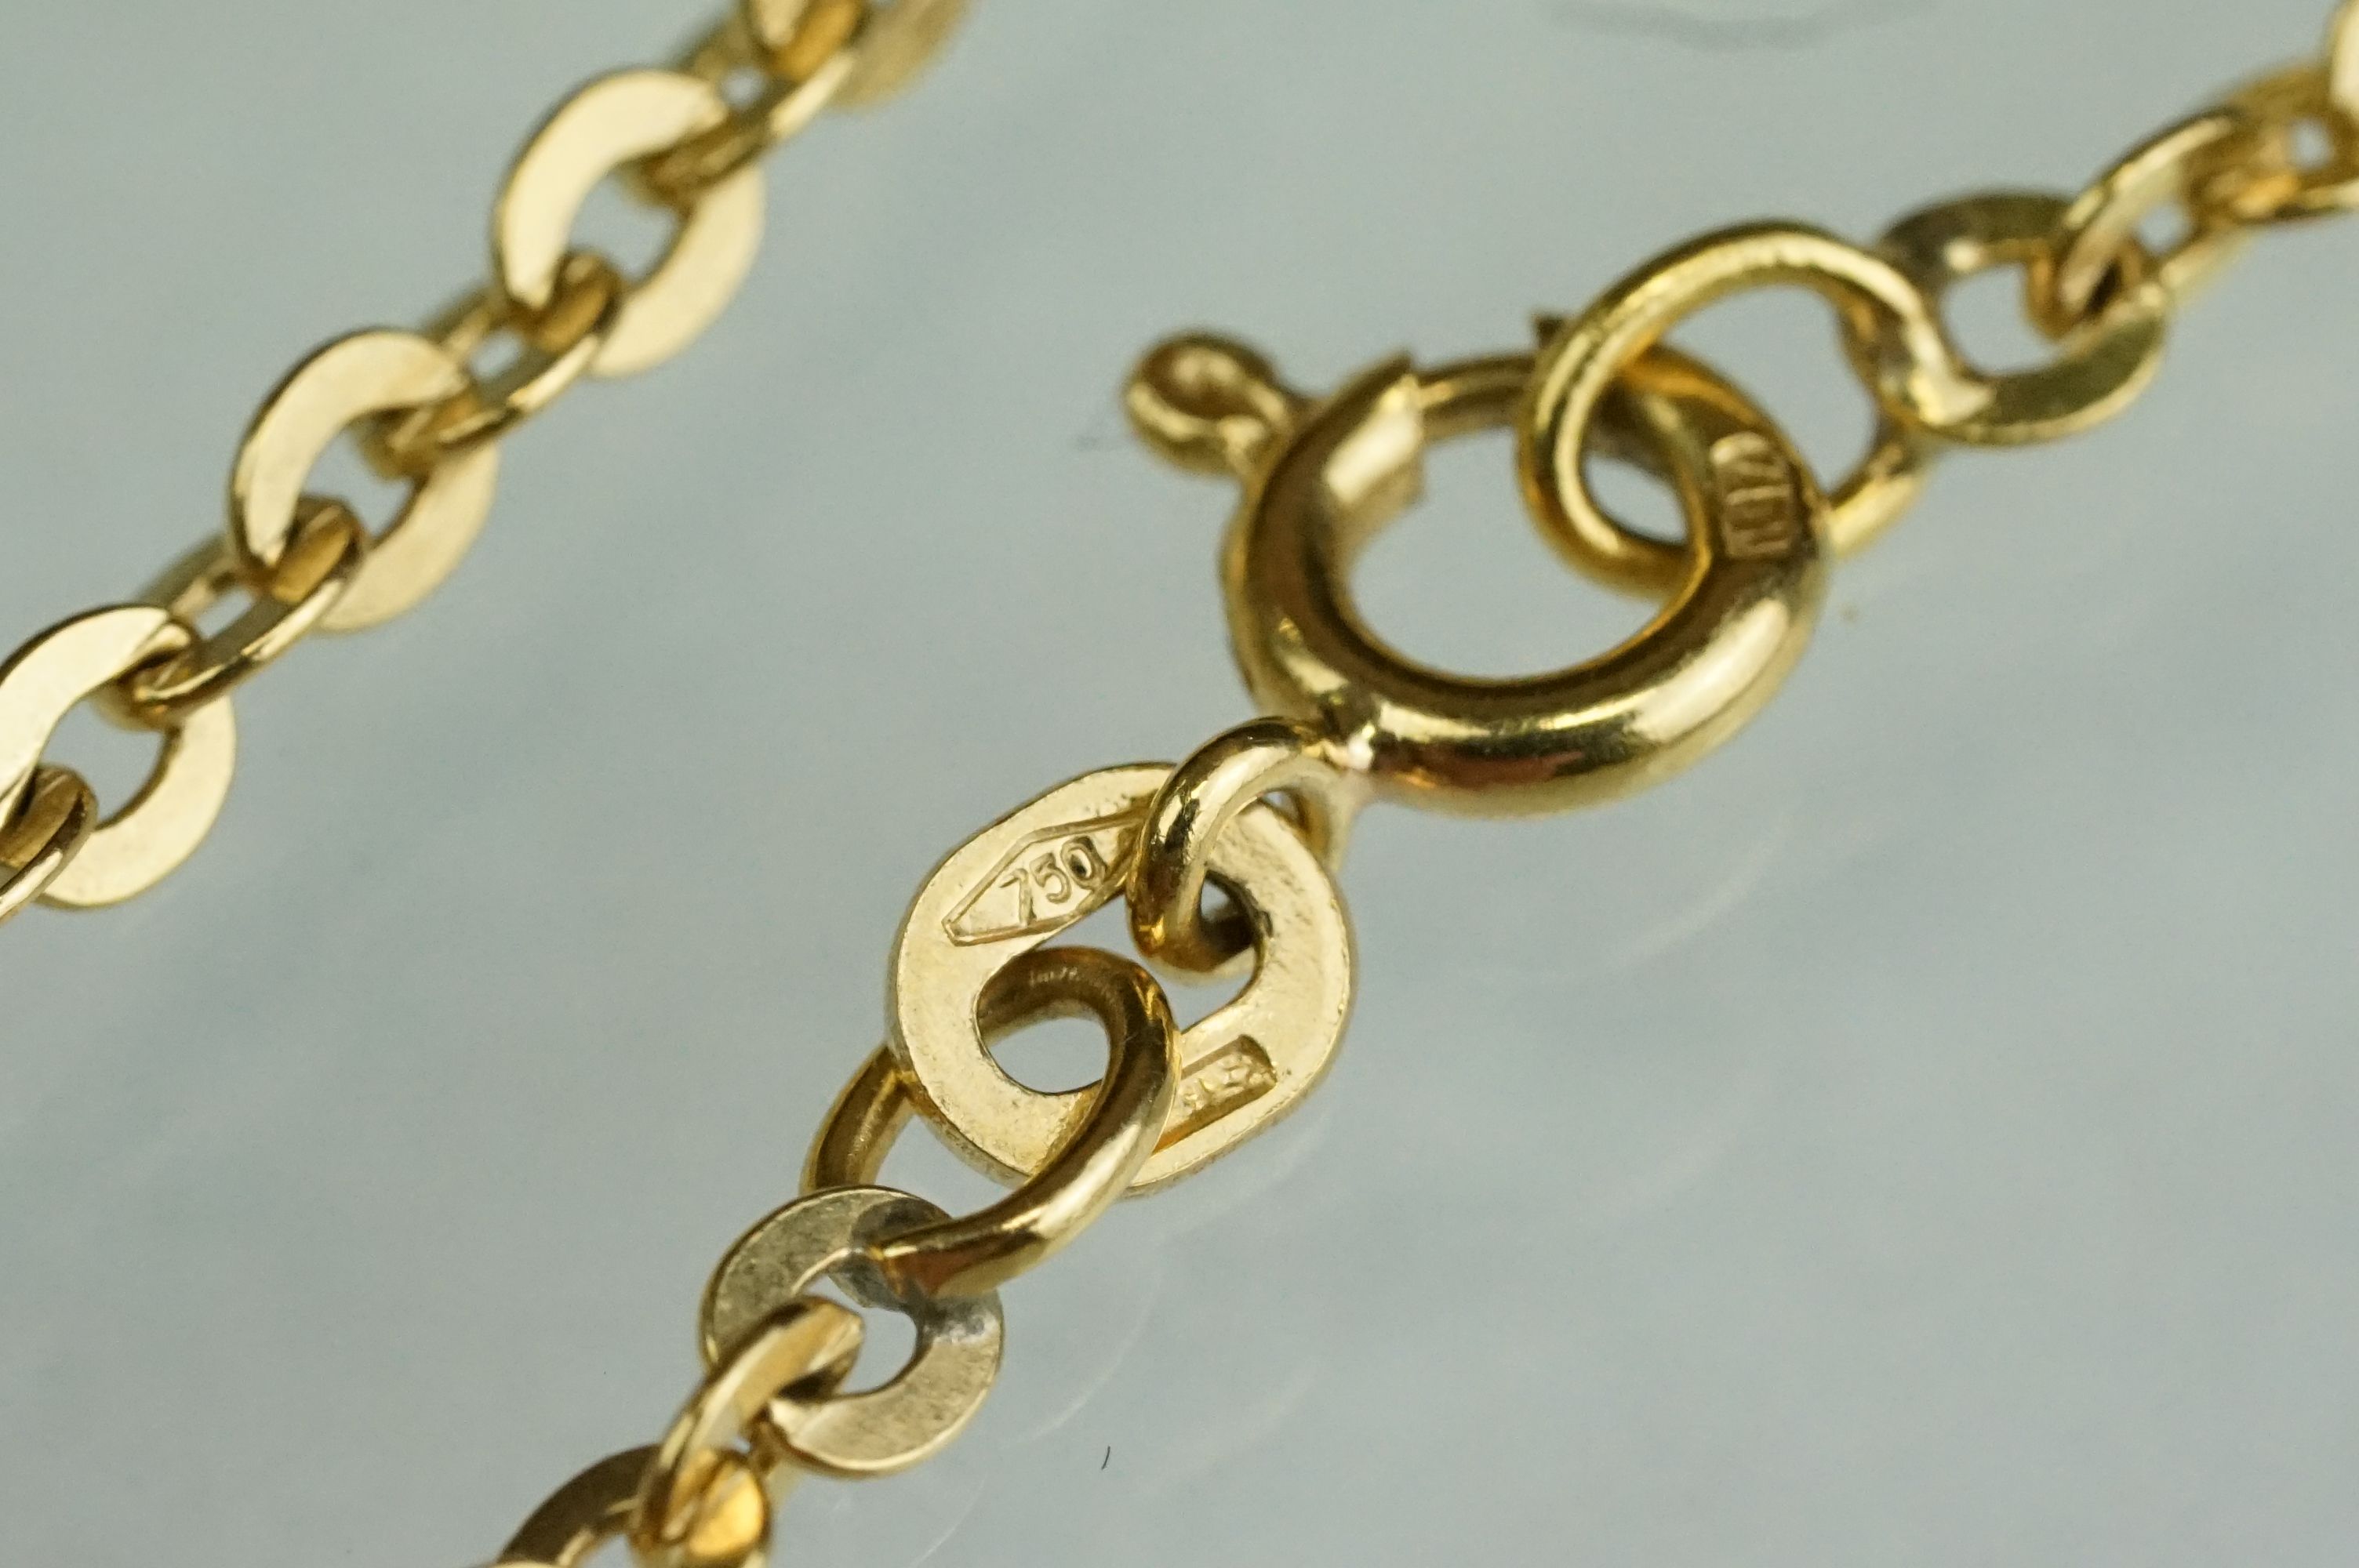 18ct yellow gold belcher link chain necklace, bolt ring clasp, length approx 50cm - Image 4 of 6